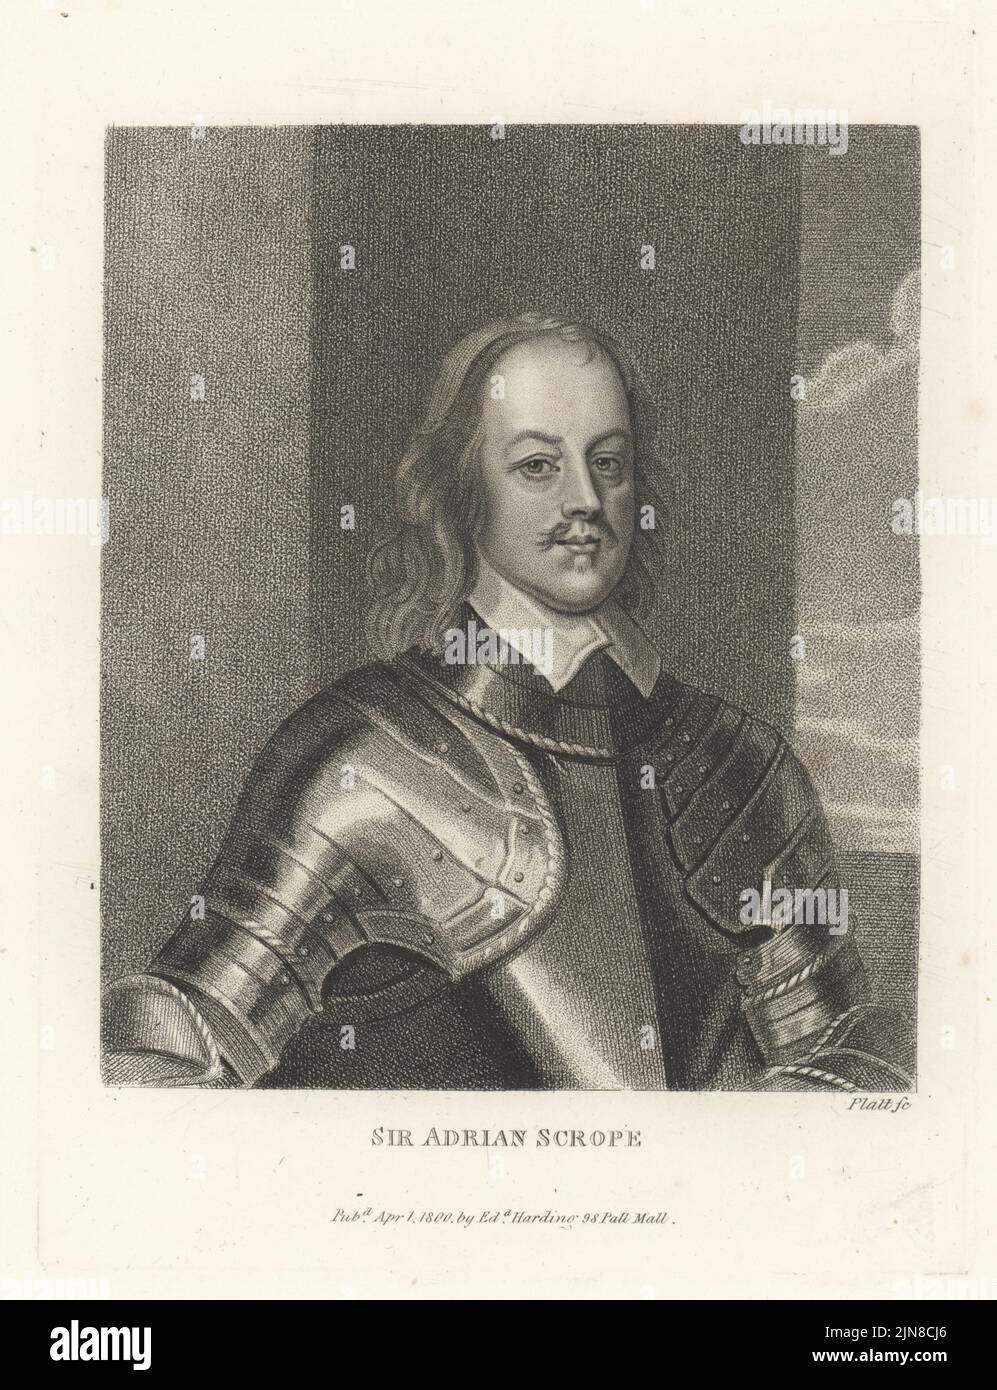 Colonel Adrian Scrope, Parliamentarian soldier during the English Civil War and signatory of the death warrant for King Charles I in January 1649. Sir Adrian Scrope. In plain collar and suit of plate armour. Copperplate engraving by Platt from John Adolphus’ The British Cabinet, containing Portraits of Illustrious Personages, printed by T. Bensley for E. Harding, 98 Pall Mall, London, 1799. Stock Photo